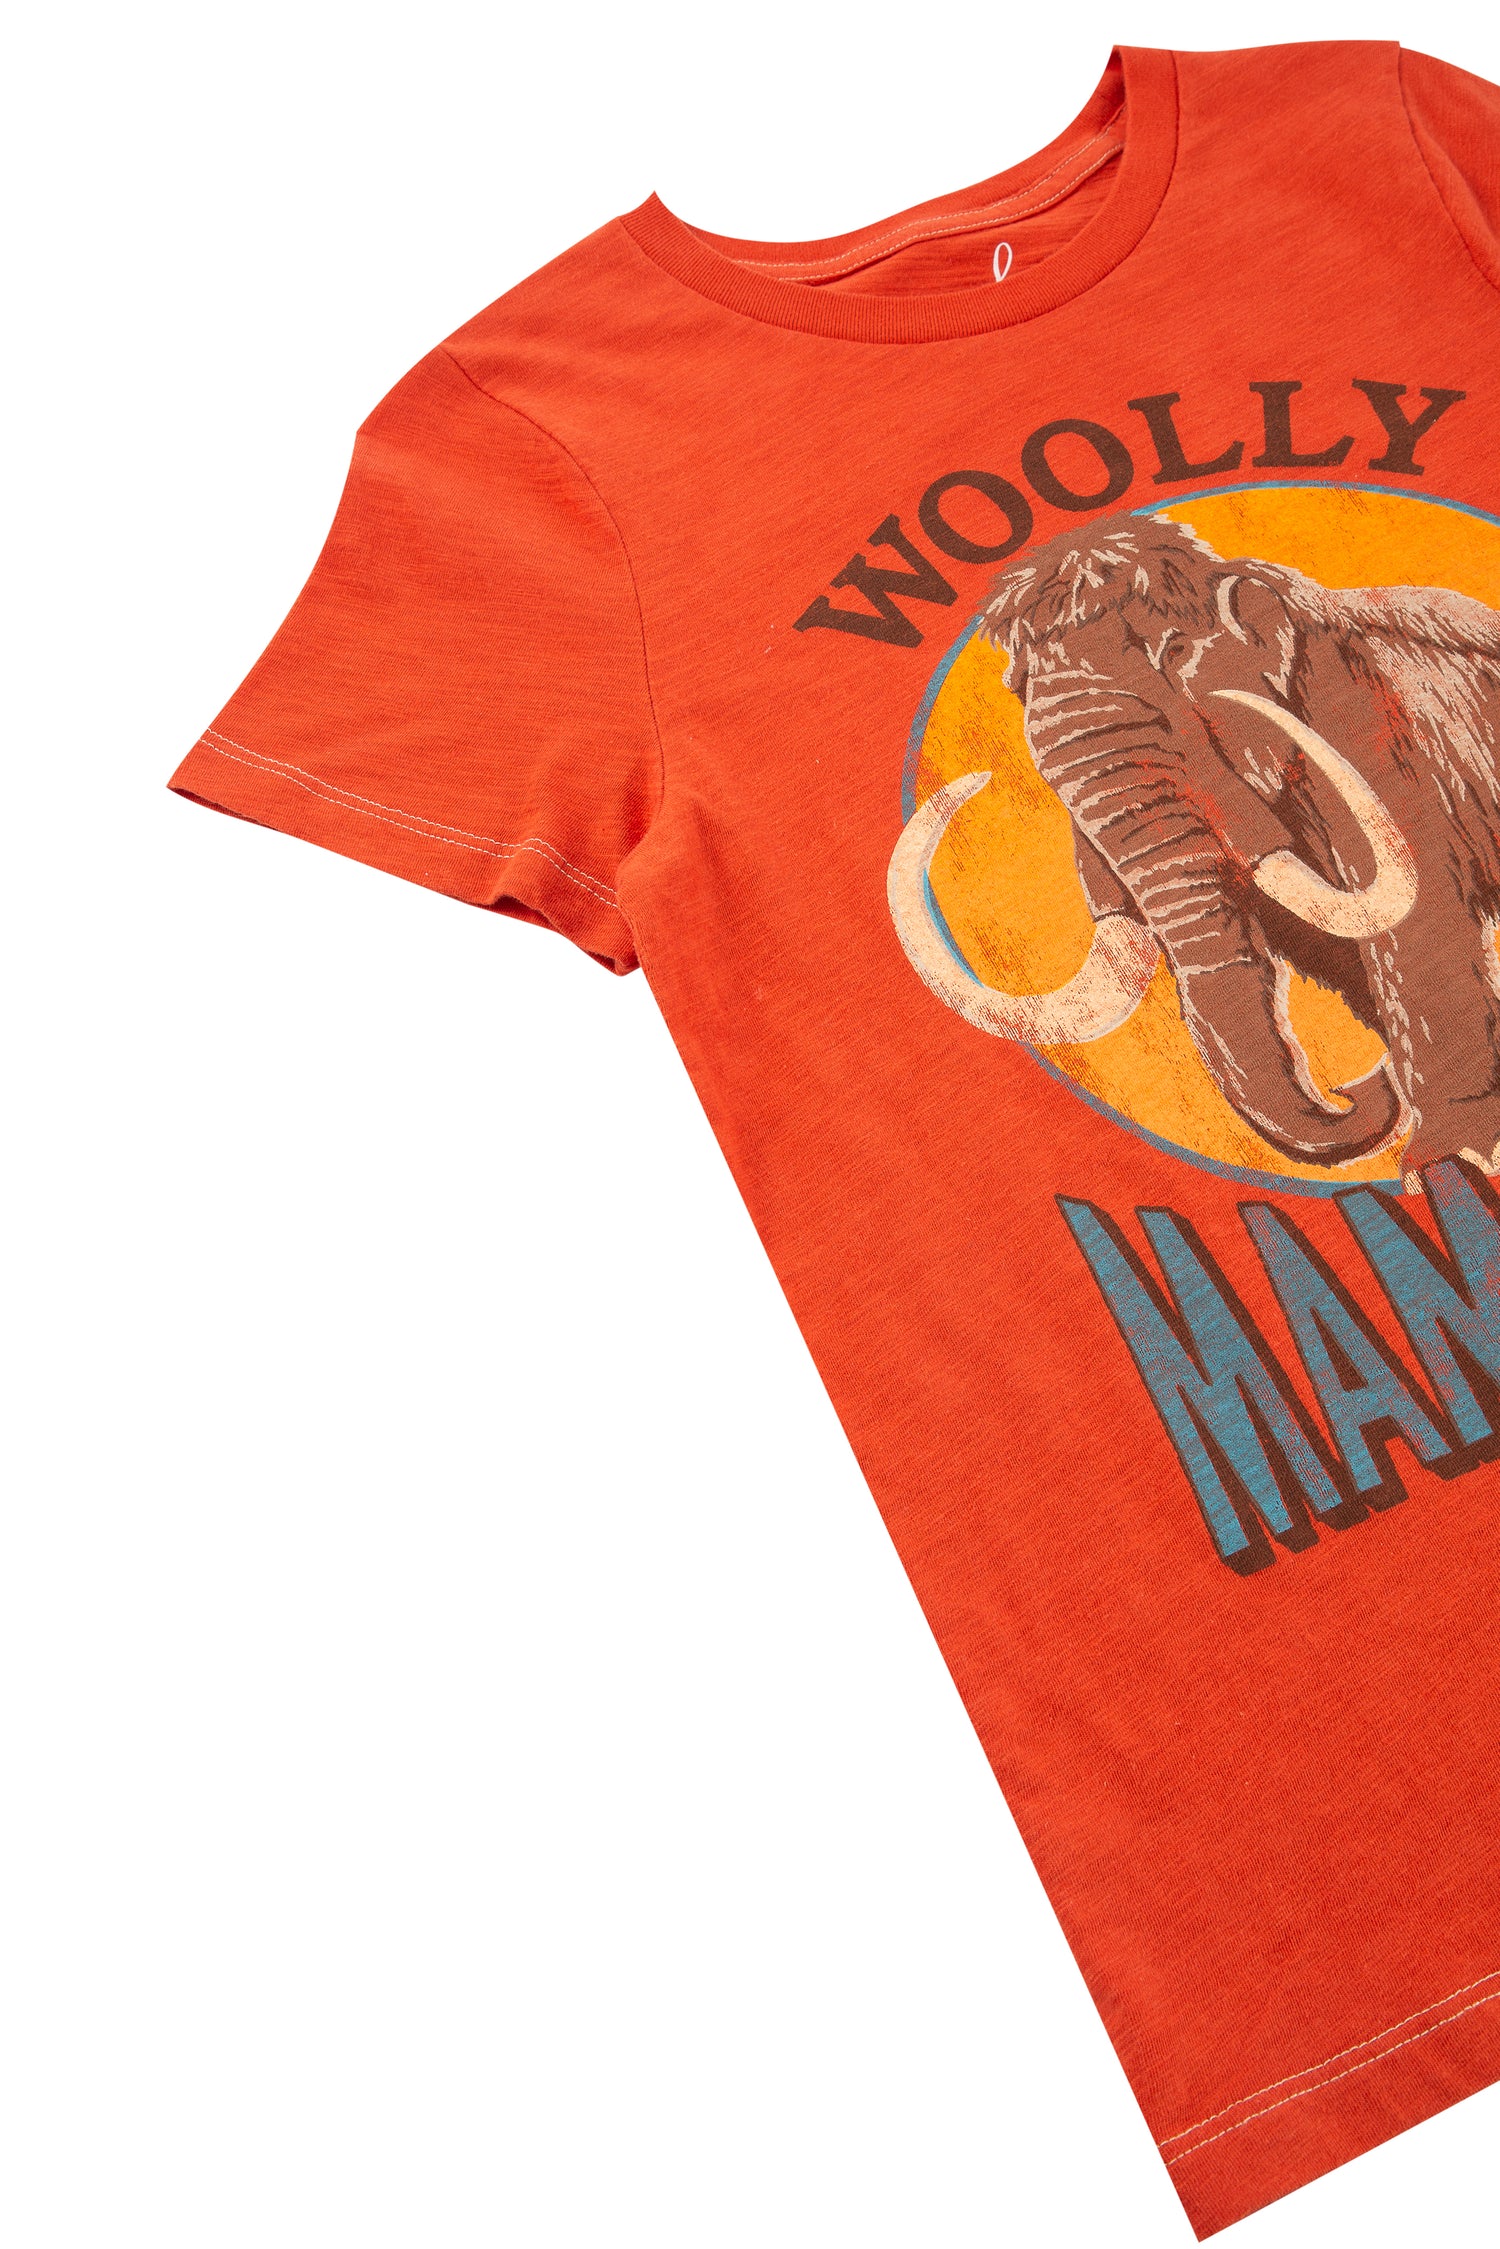 Close up of red t-shirt with illustration of a woolly mammoth and text 'Wooly Mammoth'